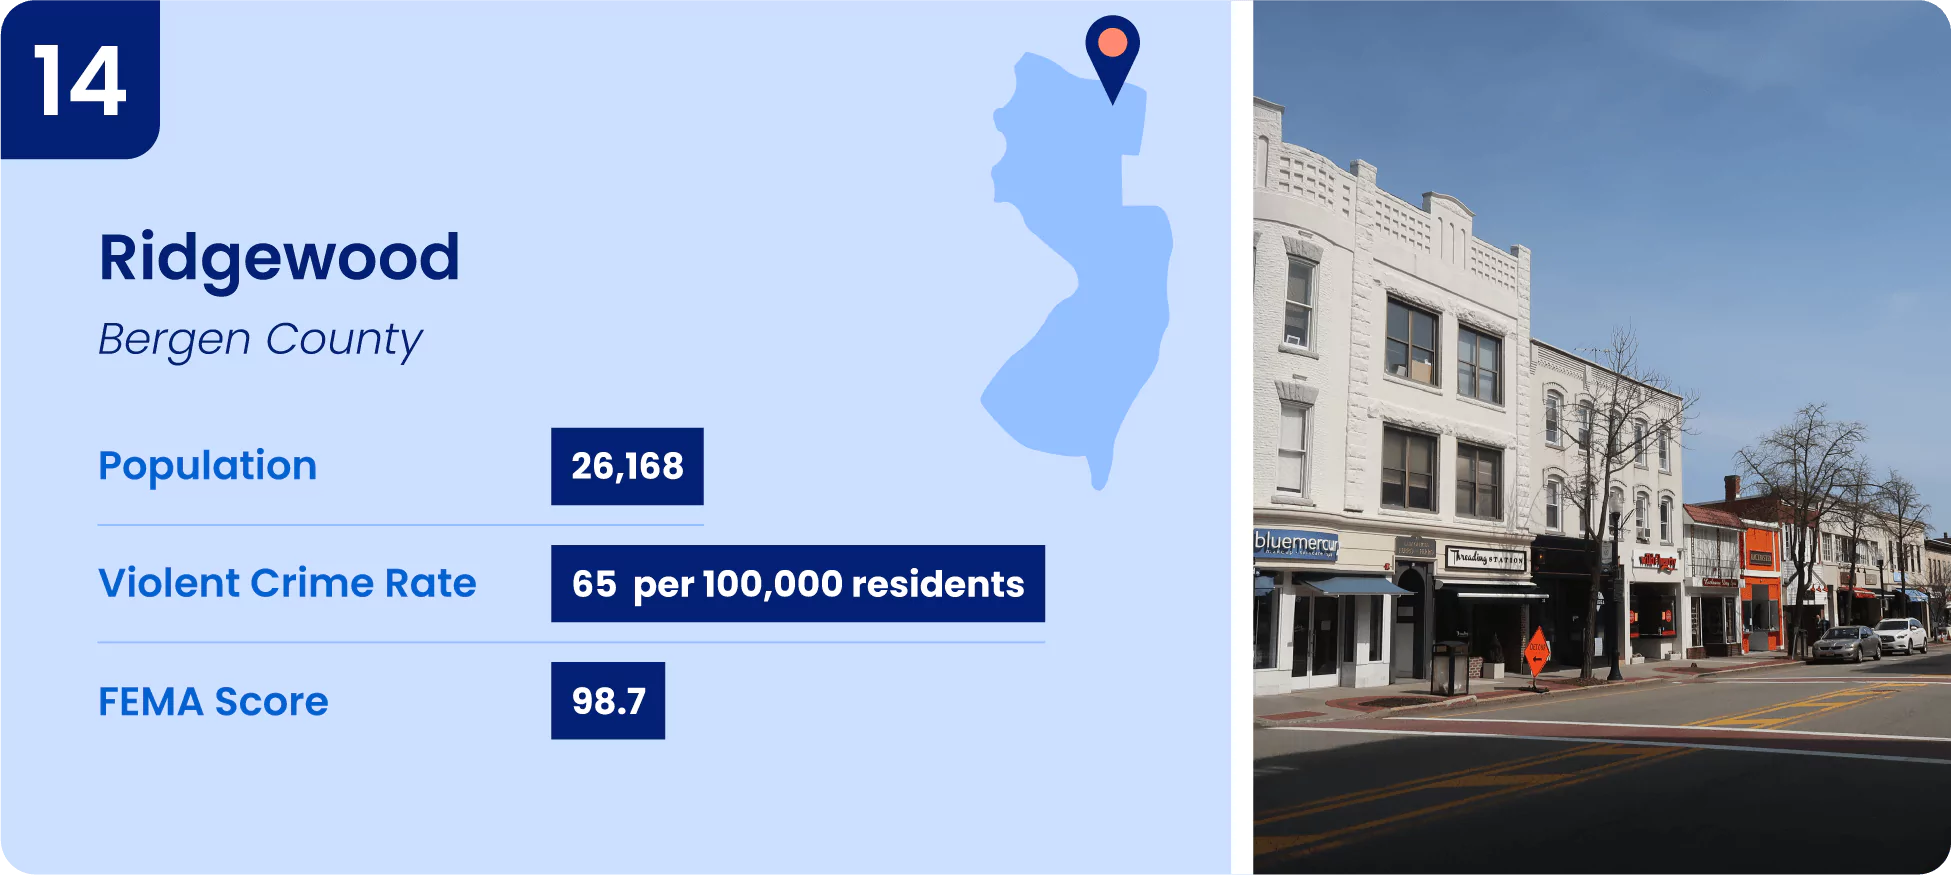 Image shows key information for one of the safest cities in New Jersey, Ridgewood.